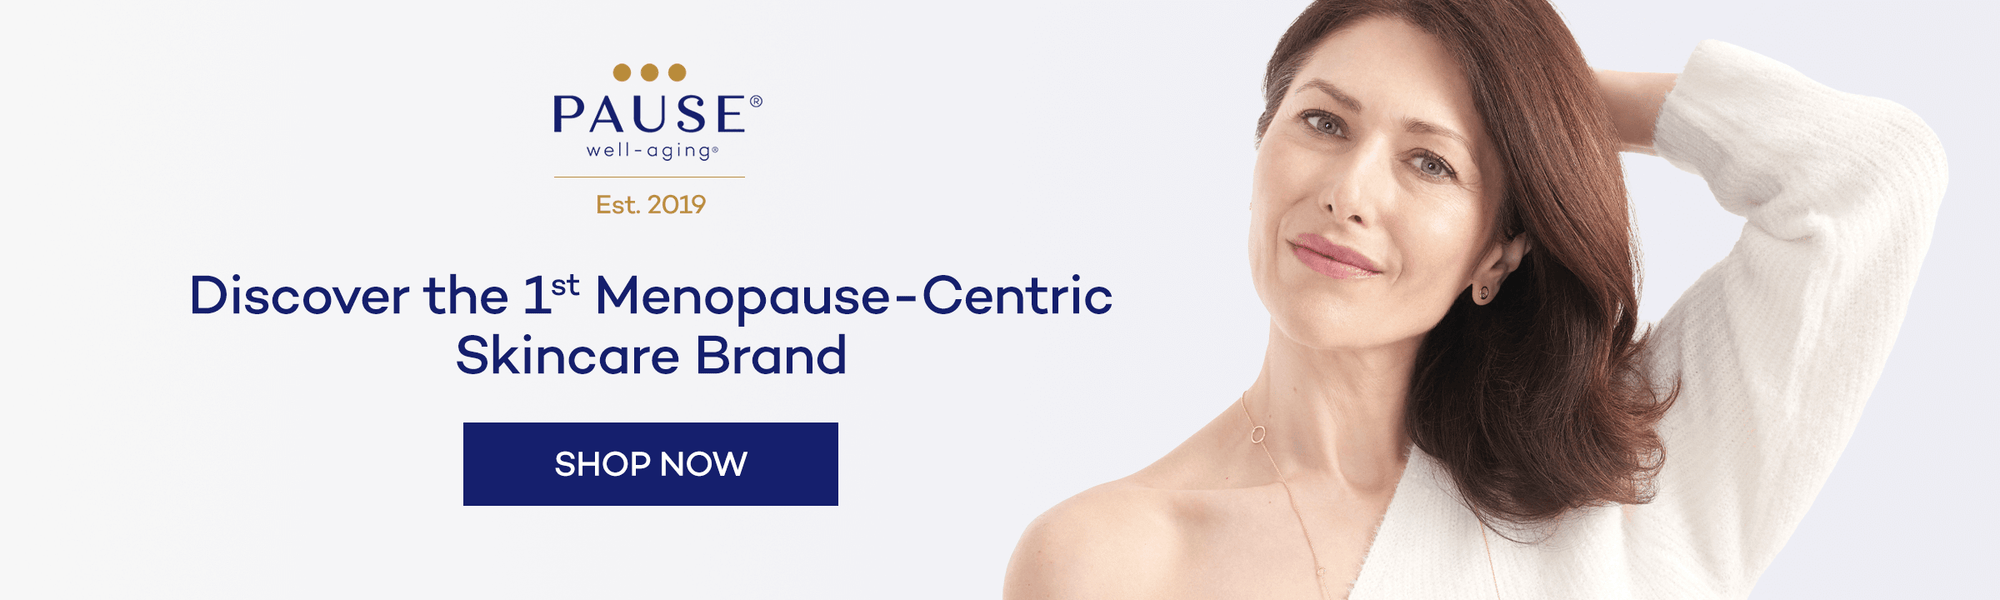 Discover the 1st menopause-centric skincare brand. Shop now.